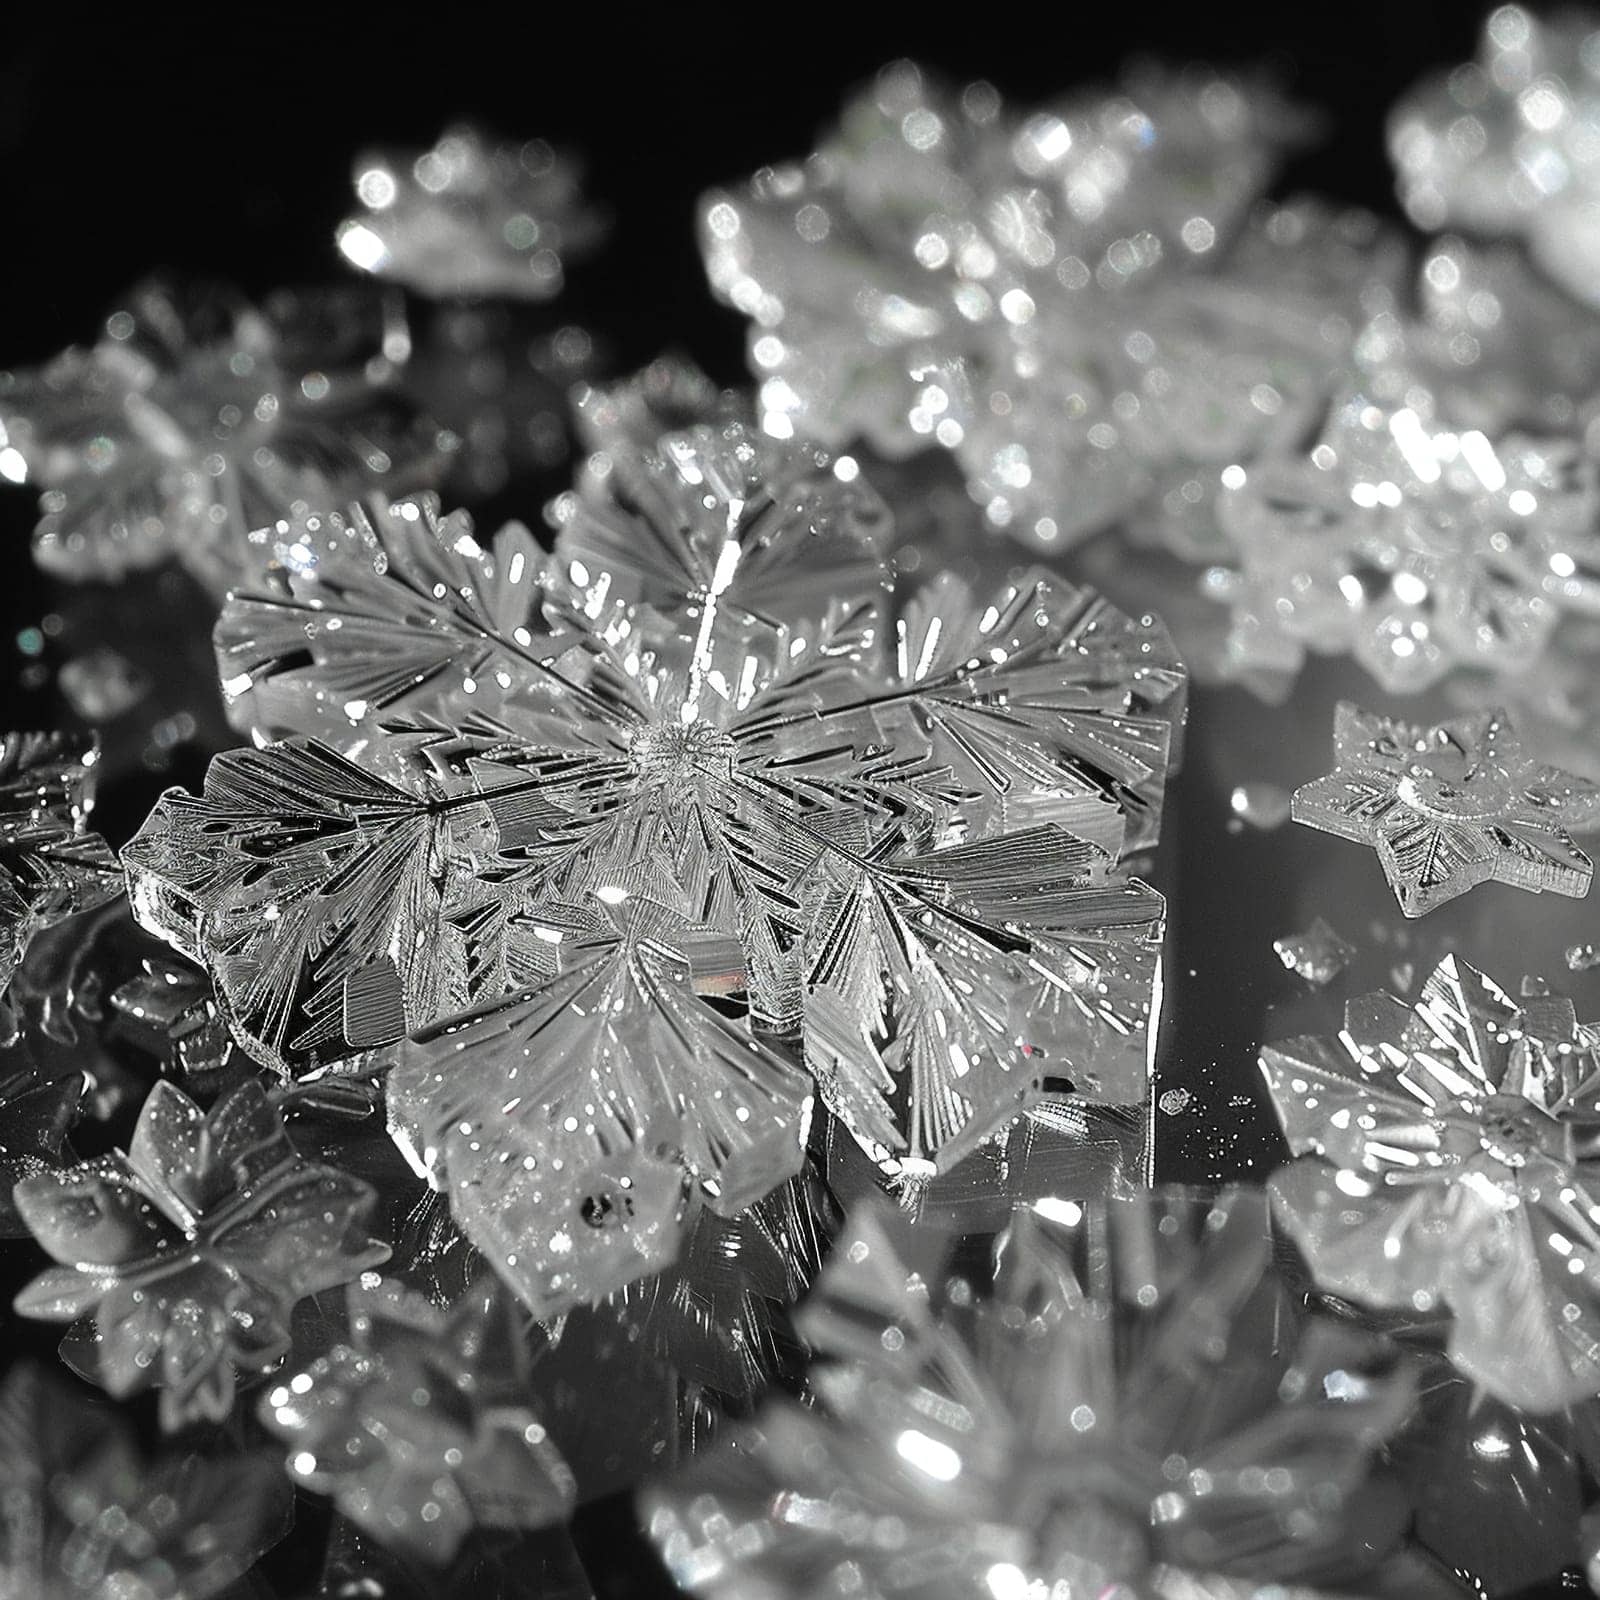 Macro photography of ice crystals, highlighting natural geometry and winter beauty.